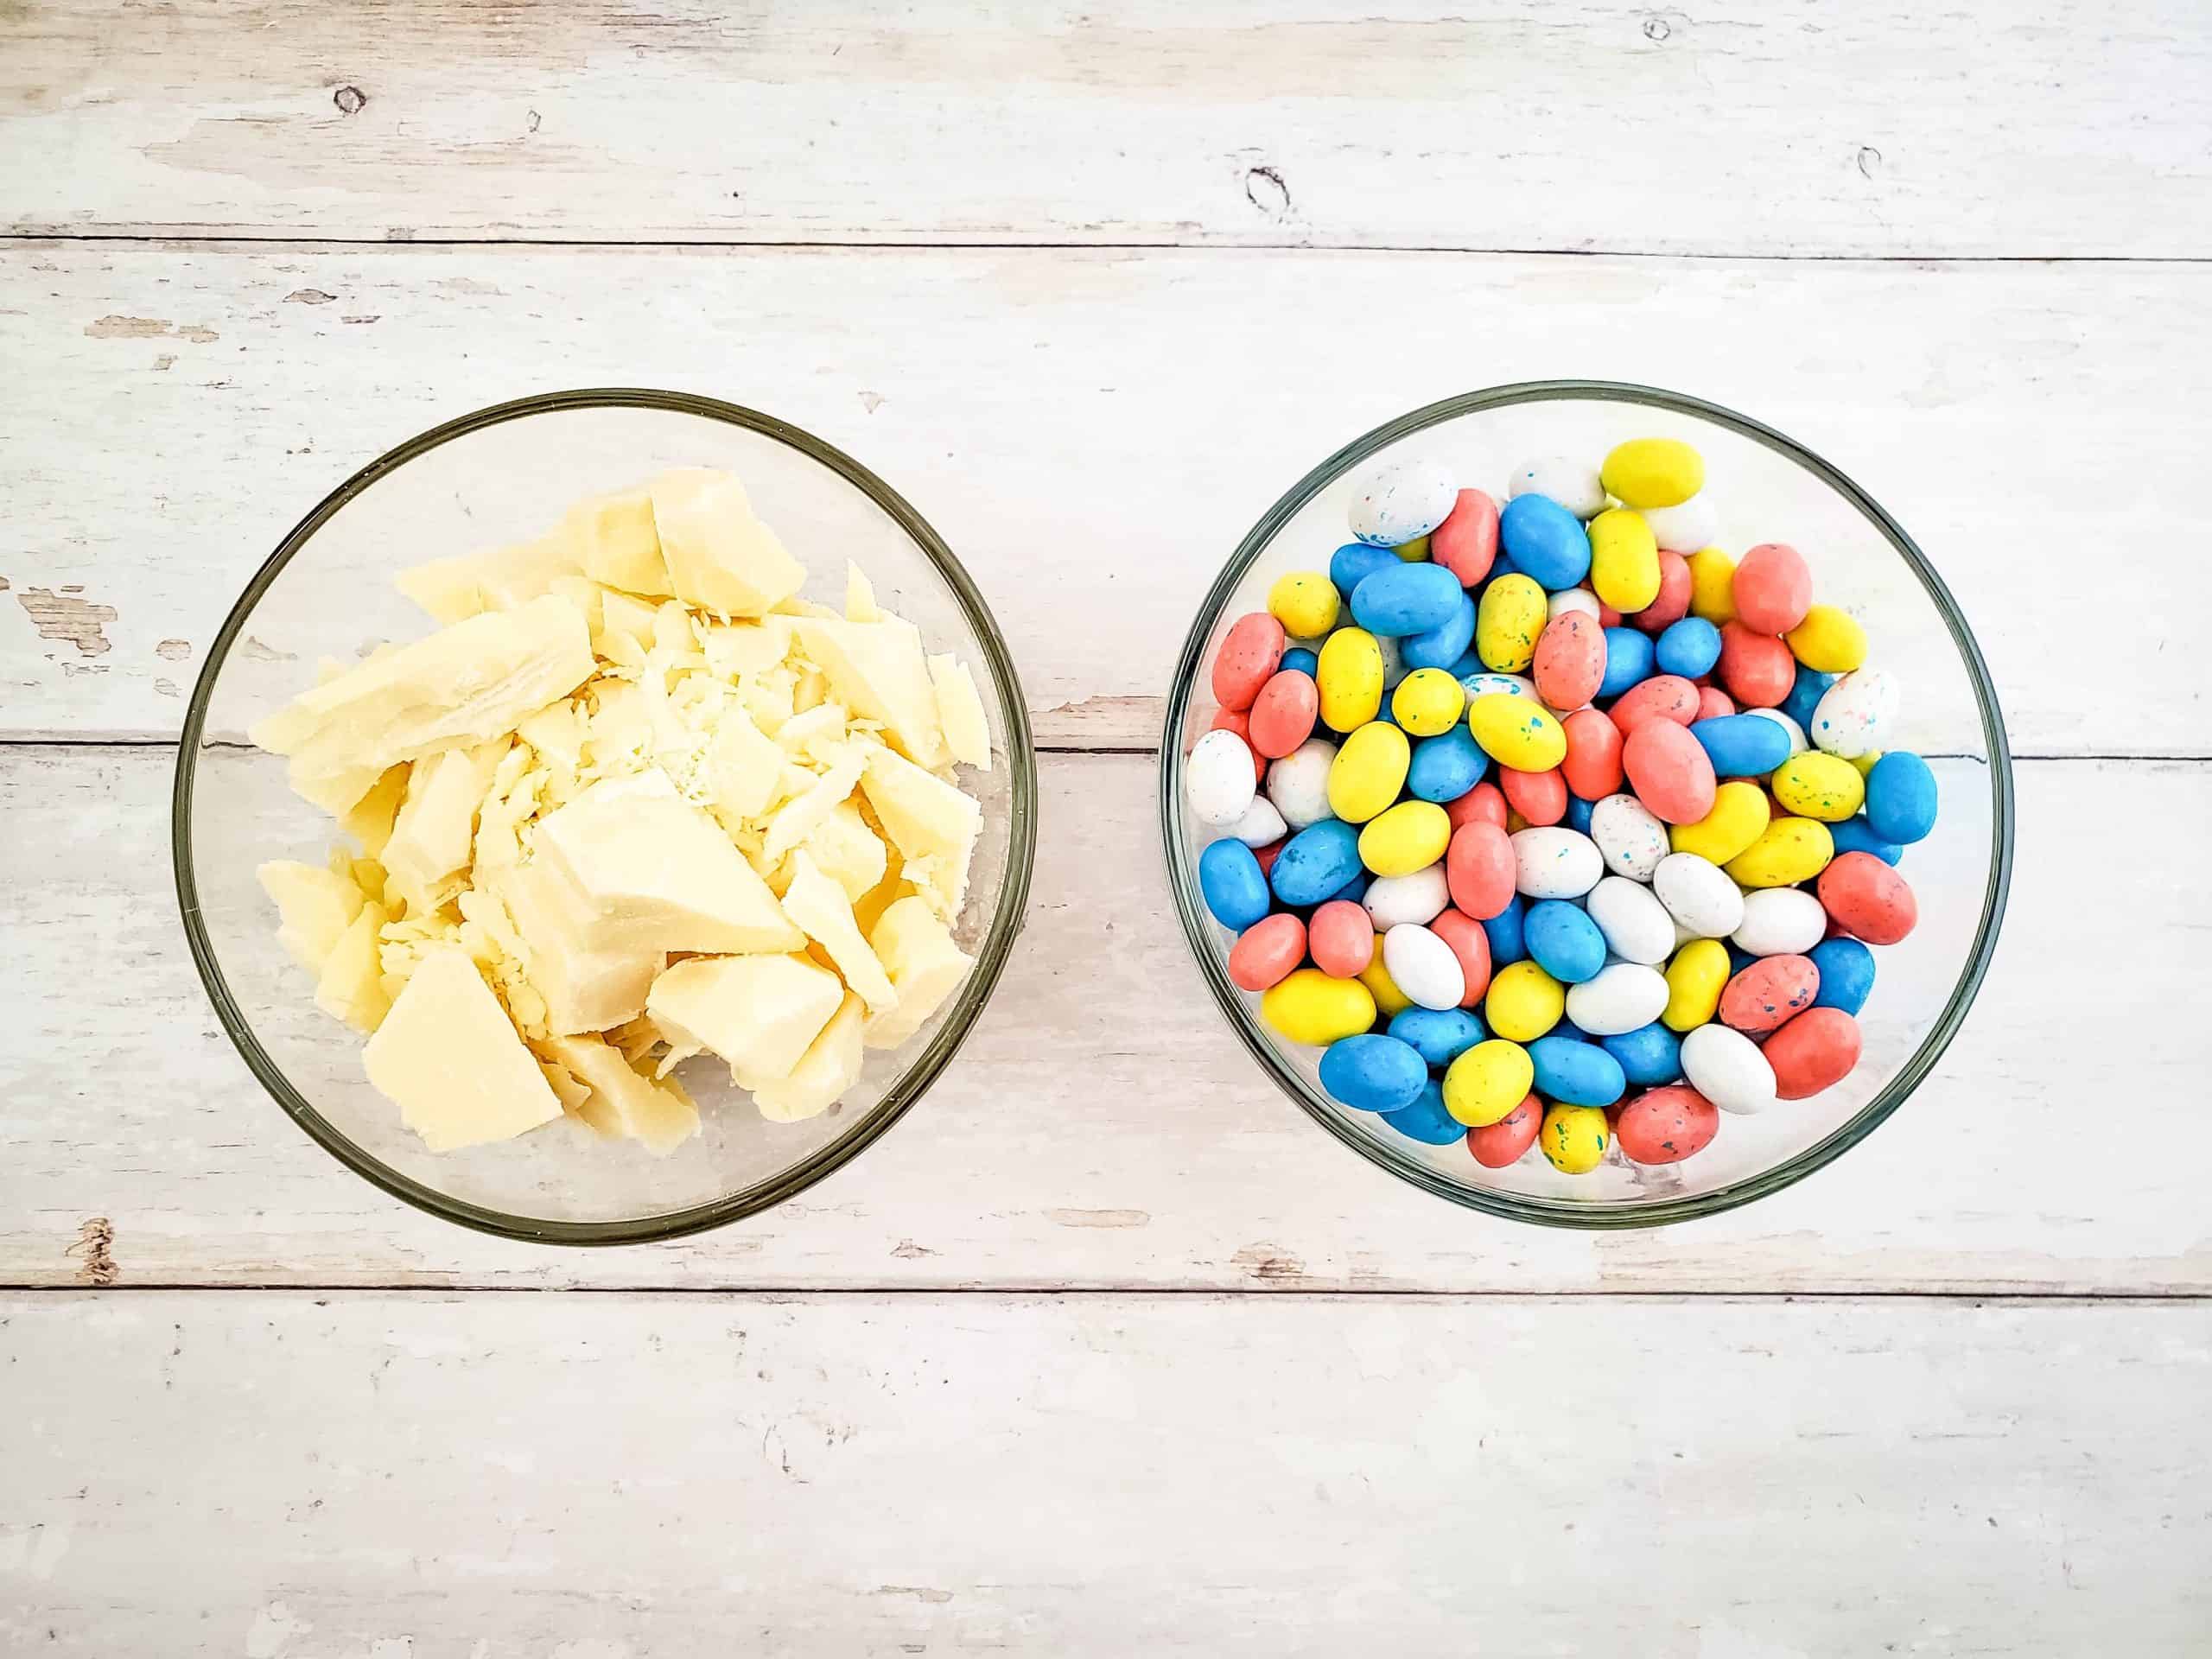 white chocolate cut into small pieces and robin's egg easter candies in two bowls